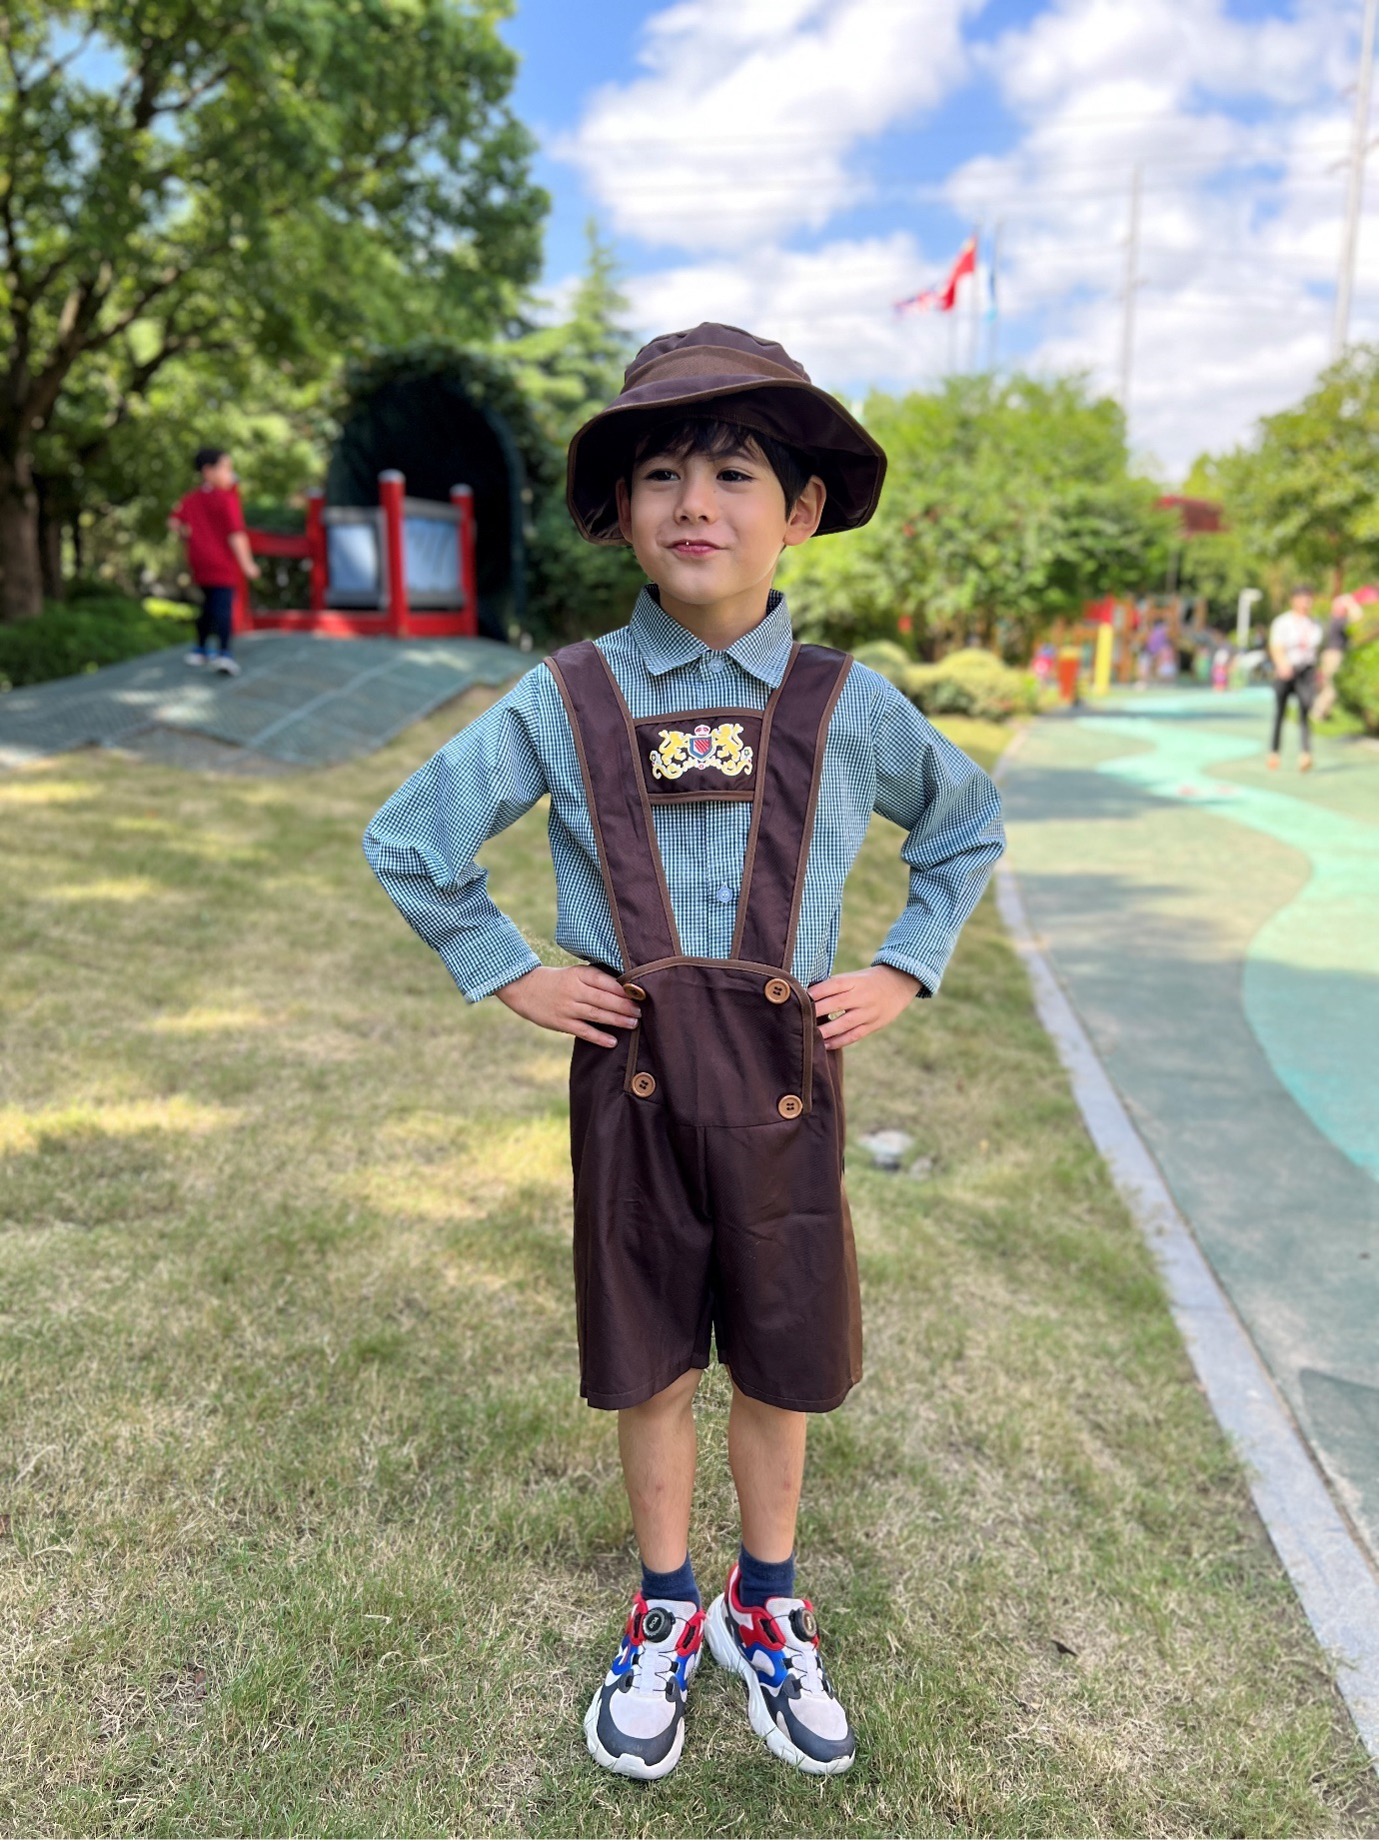 Lucas – I am wearing lederhosen today. It’s traditional clothing in Germany.